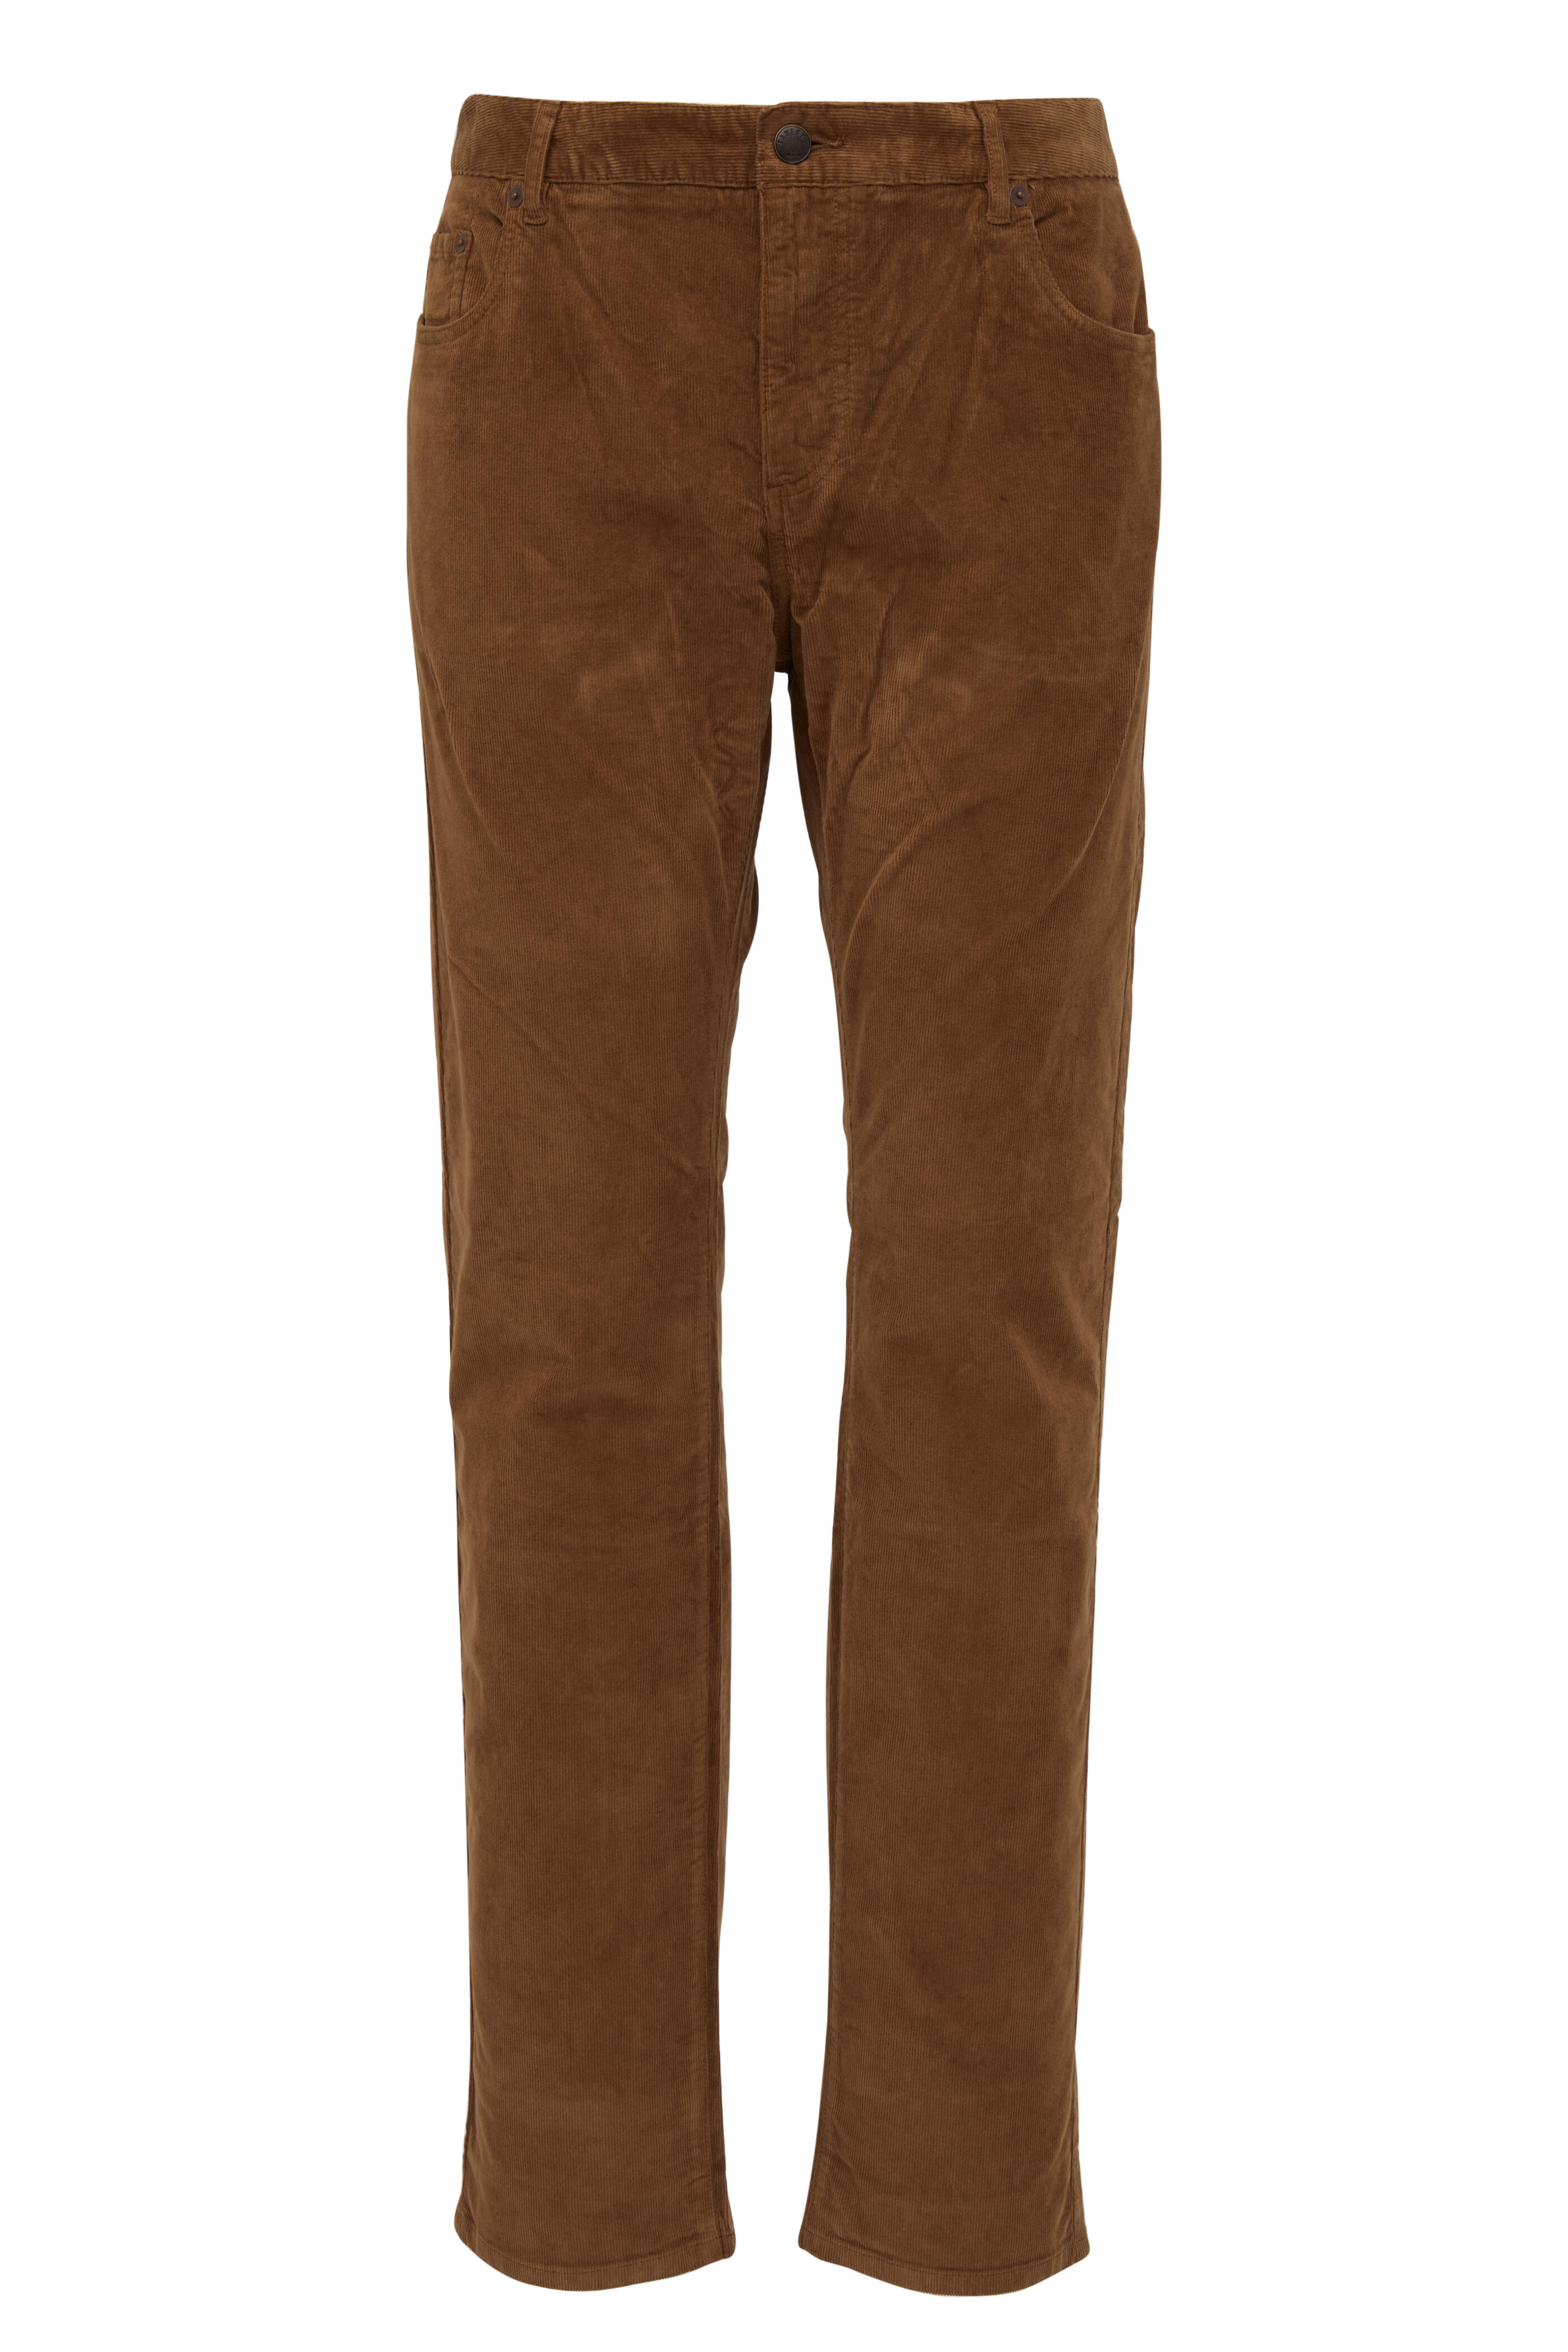 Pant Guide  Faherty Brand